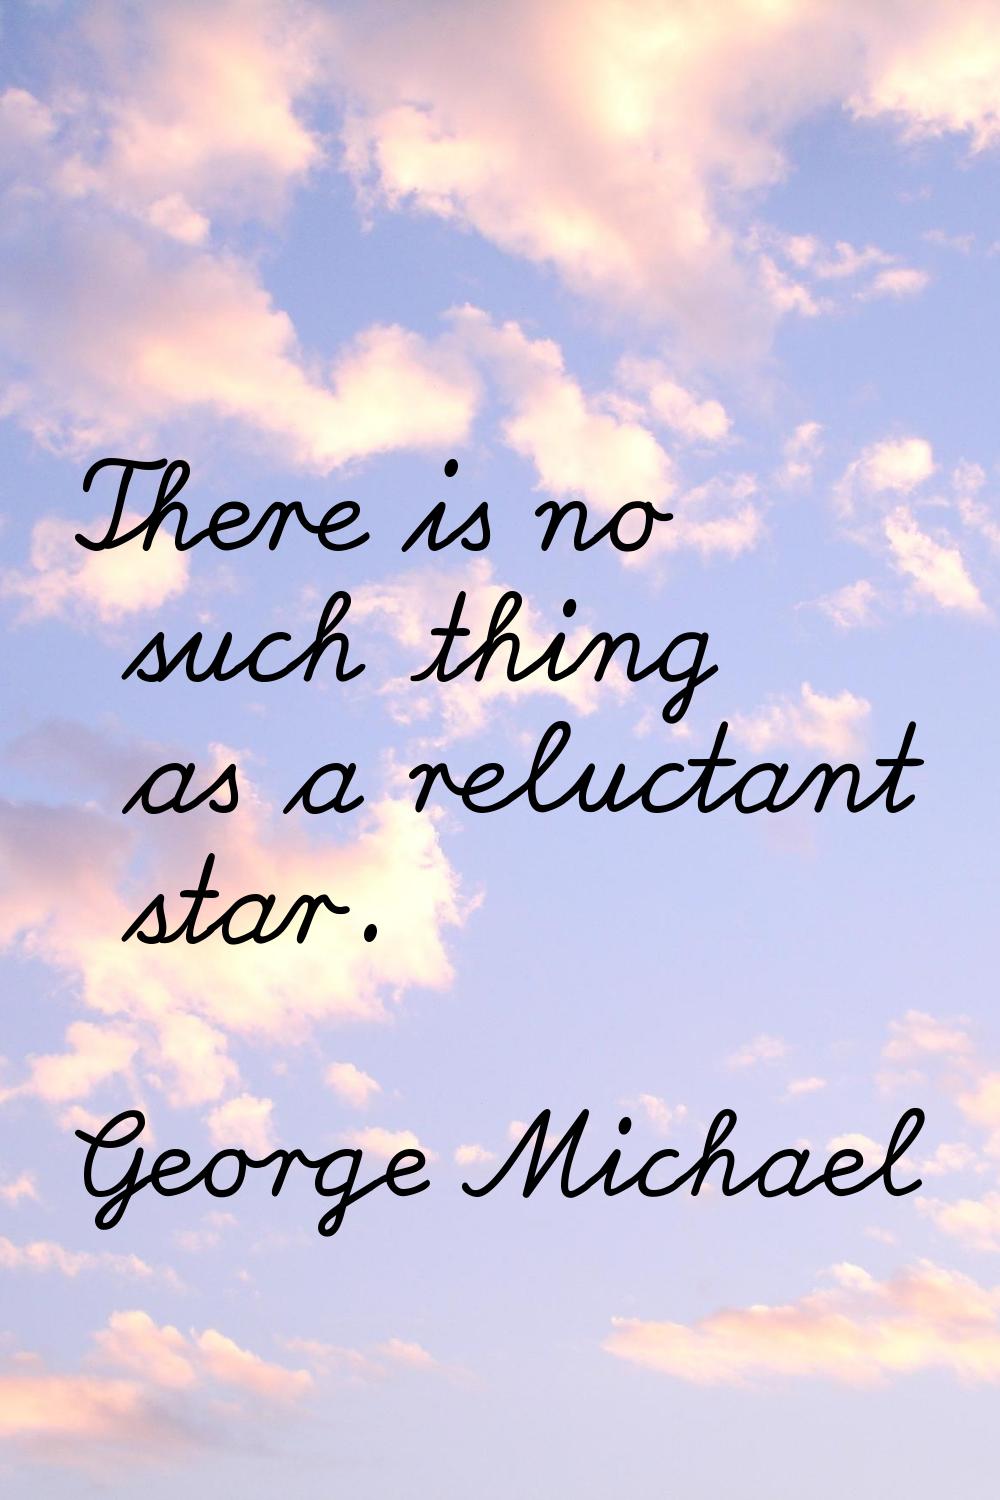 There is no such thing as a reluctant star.